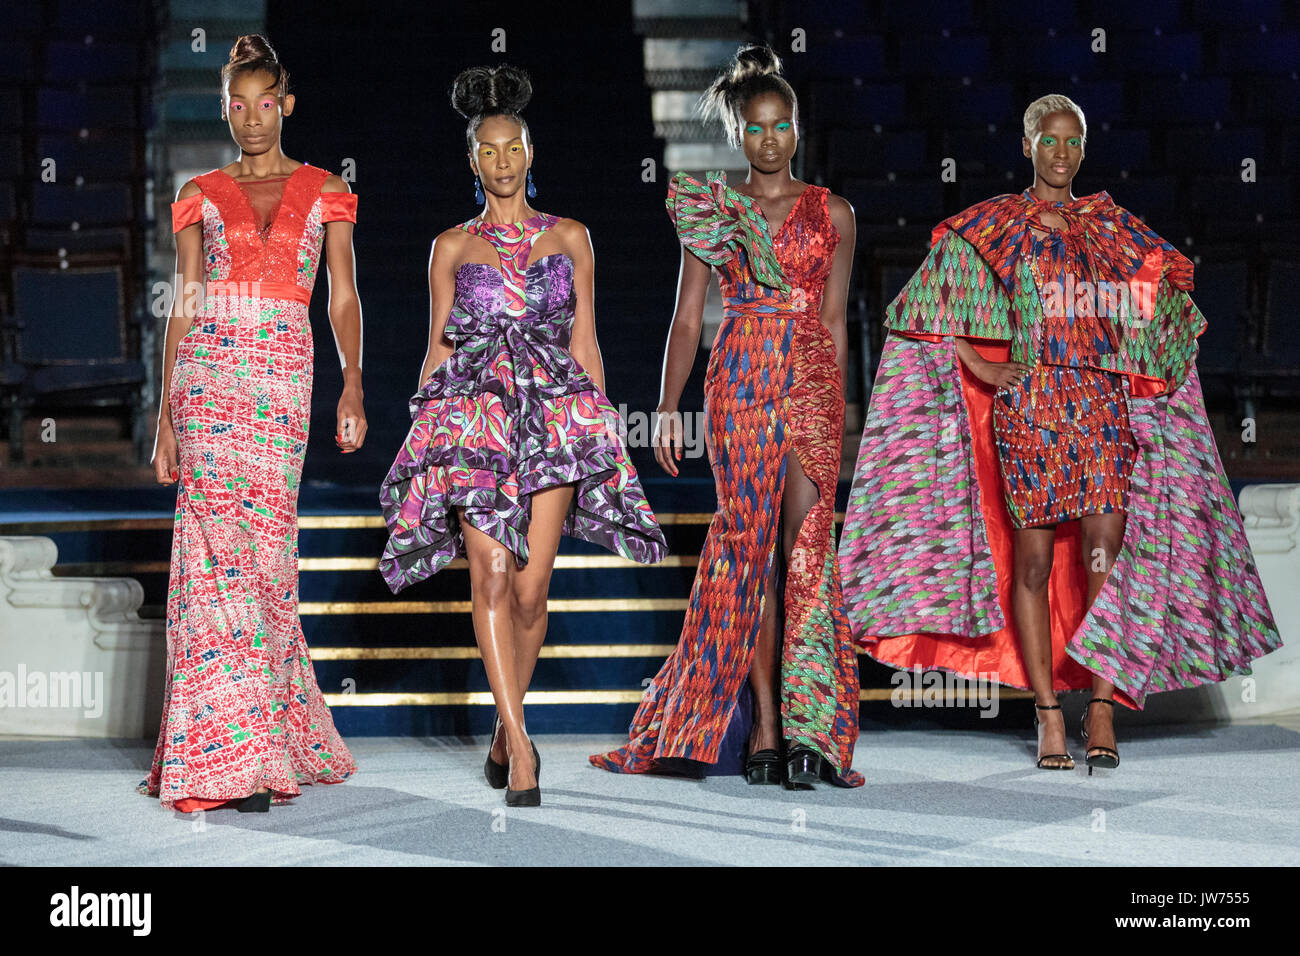 London, UK, 11th August 2017. The Araewa designs are presened. Models on the second runway of the day, with designs by Godwin Green, Araewa, Bijelly, Regallia, Maufechi, Monami 4 Moremi, Kola Kuddus. Since debuting in 2011, the two day Africa Fashion Week London, AFWL, has grown into one of the largest Africa inspired fashion events in Europe. Stock Photo